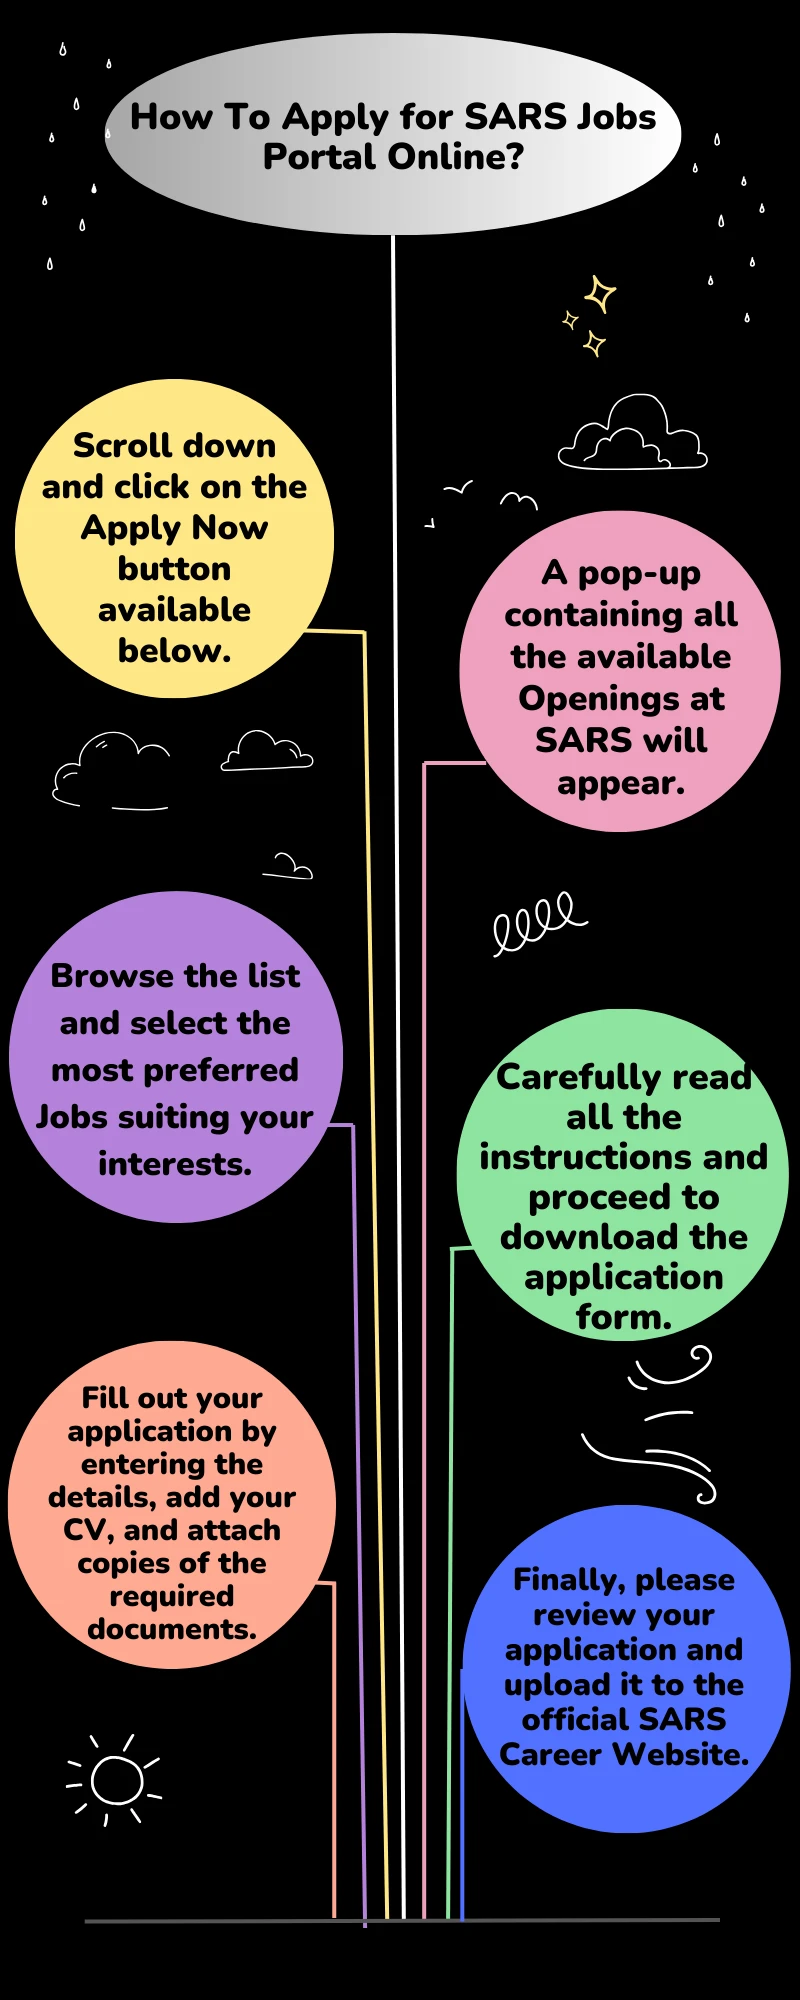 How To Apply for SARS Jobs Portal Online?